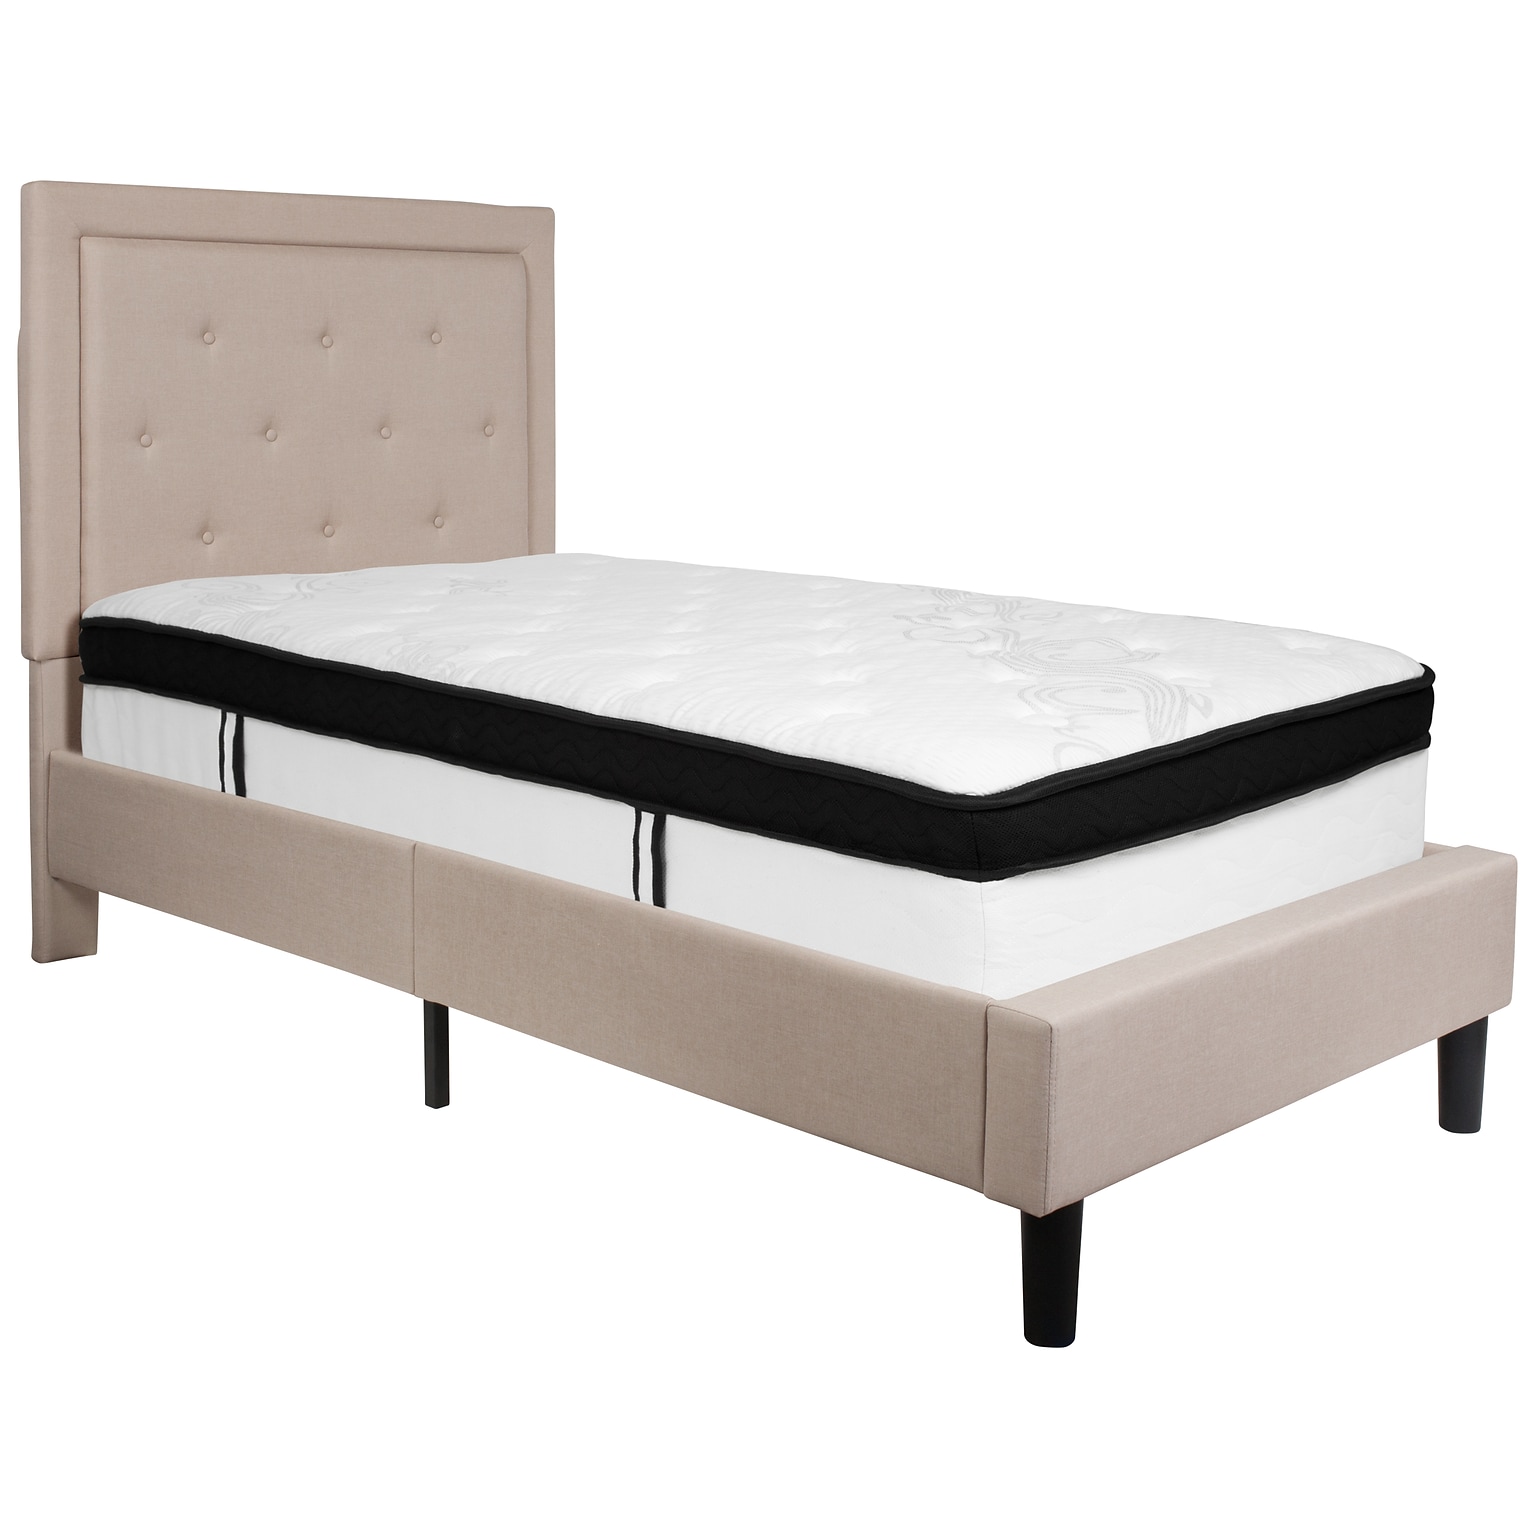 Flash Furniture Roxbury Tufted Upholstered Platform Bed in Beige Fabric with Memory Foam Mattress, Twin (SLBMF17)